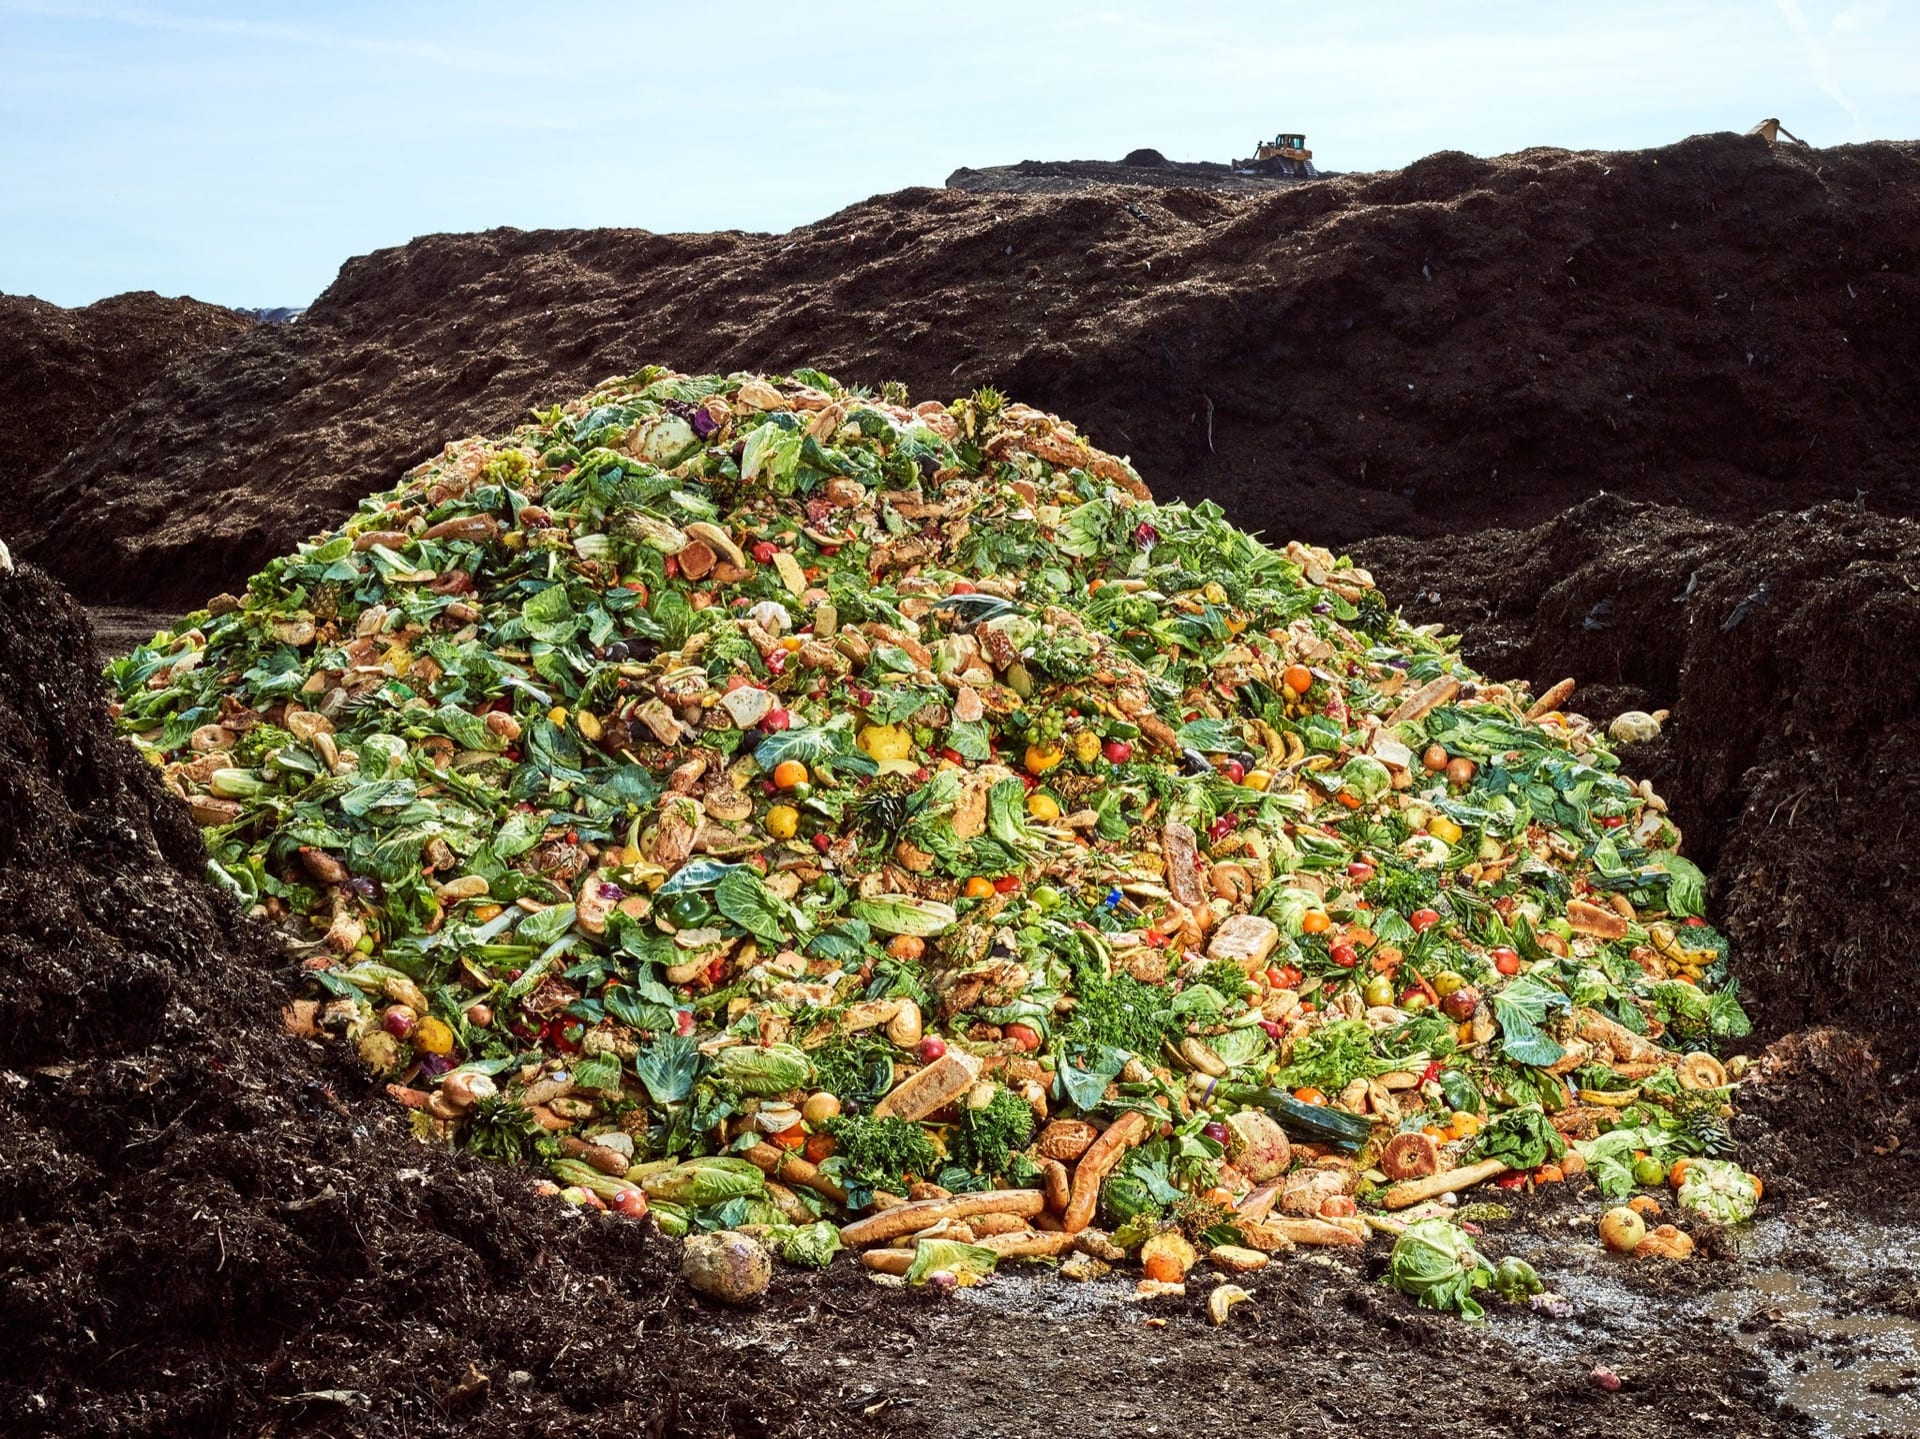 Response to “The Compost King of New York”